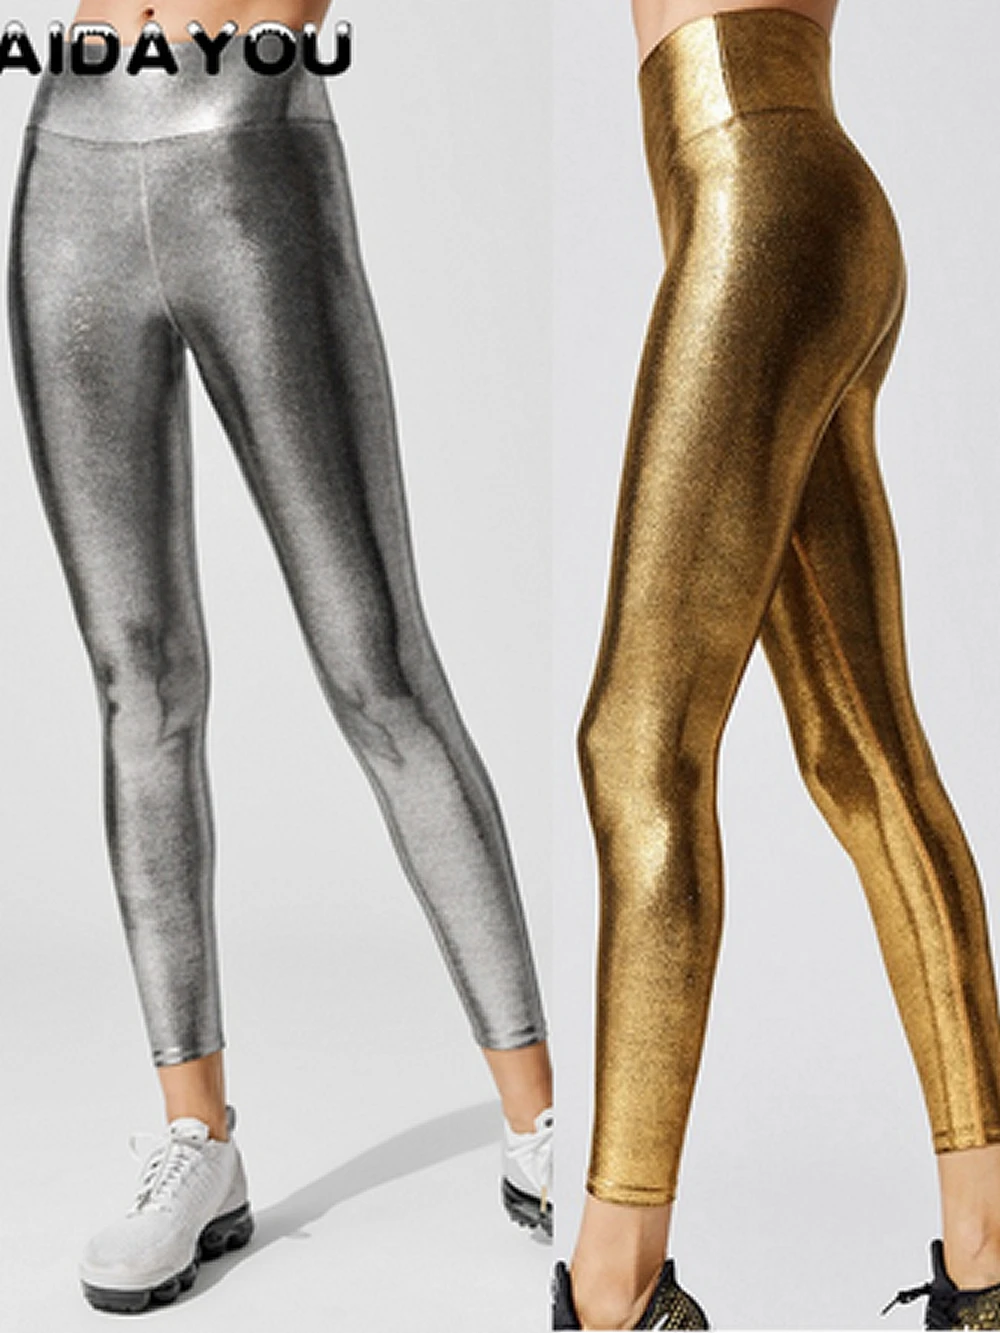 Metallic Leggings Shiny High-Waisted for Women Holiday Christmas Silver Trousers Stretchy Streetwear ouc1187